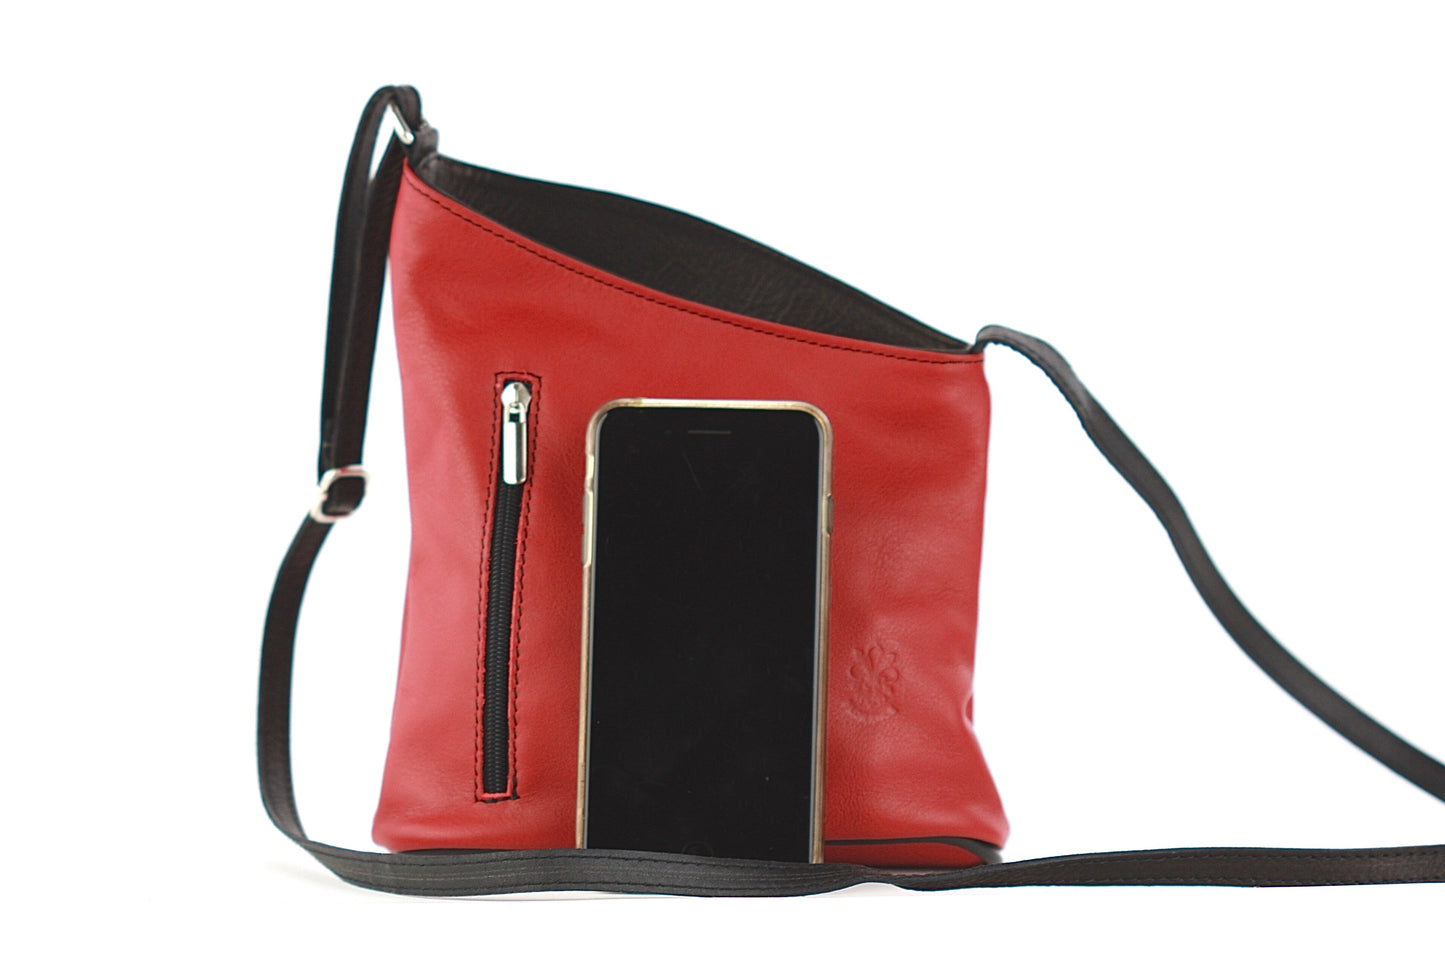 Miriam bag in red and black